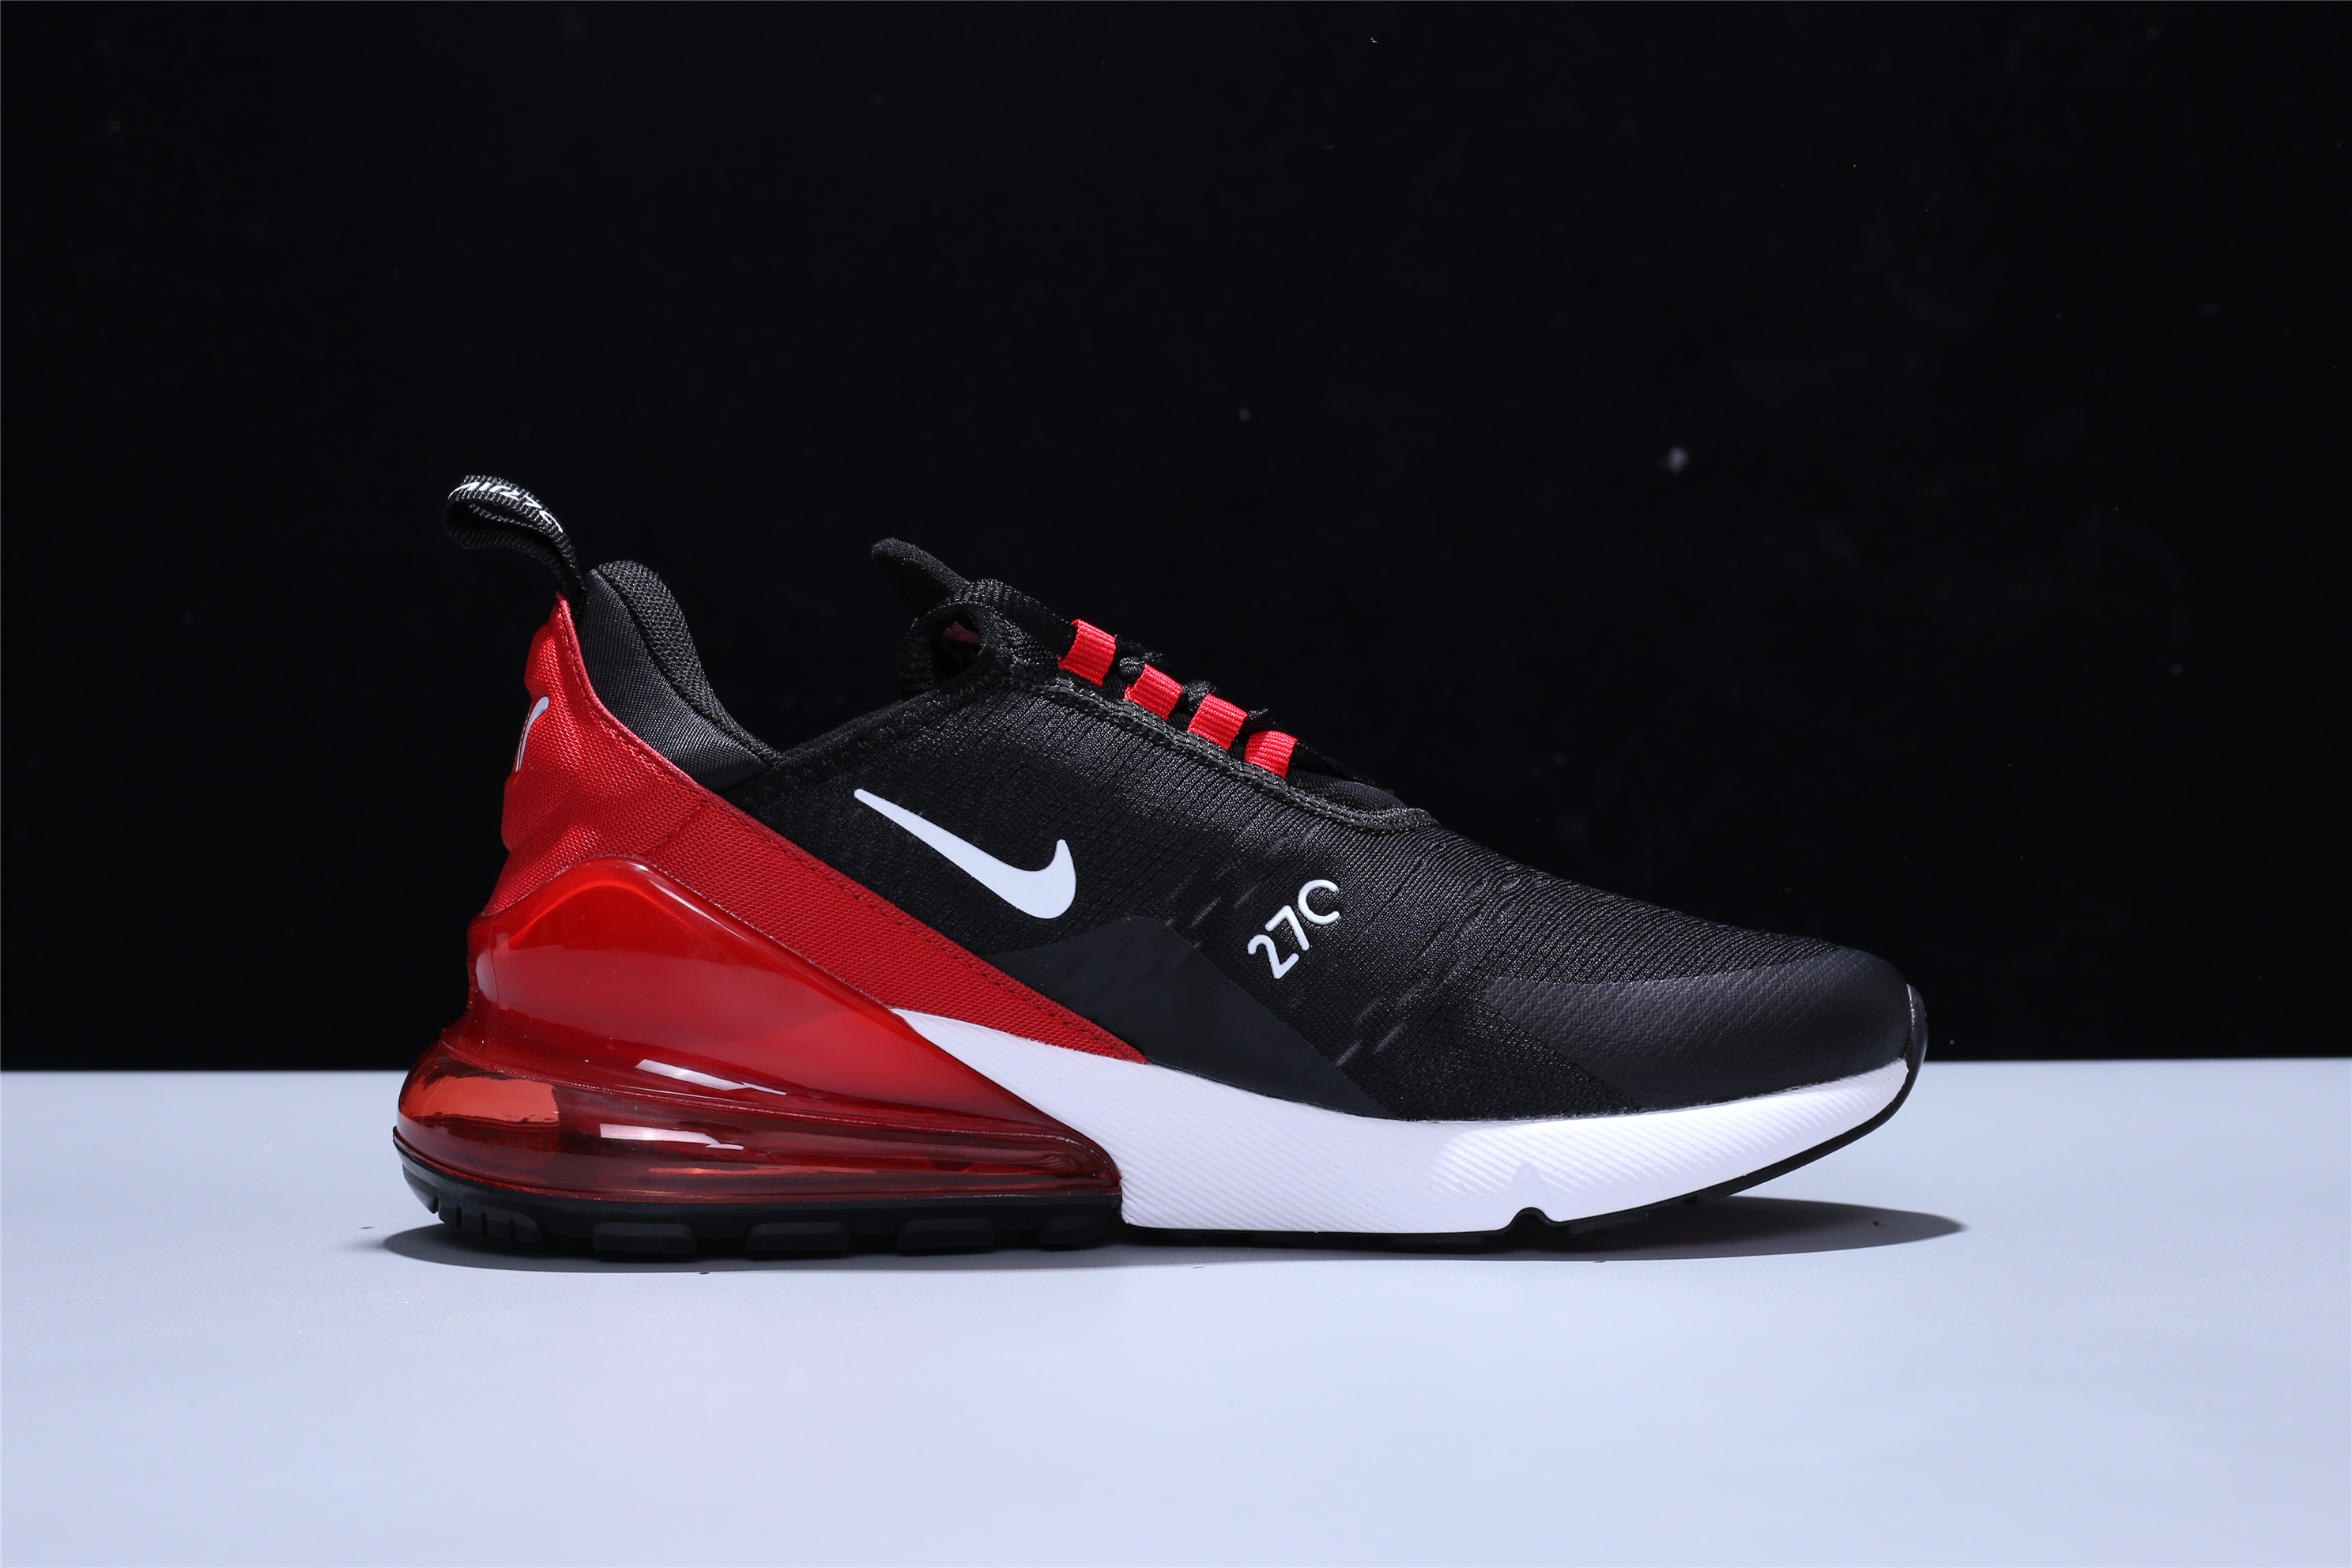 Nike Air Max 270 ‘Bred’ For Sale – The Sole Line